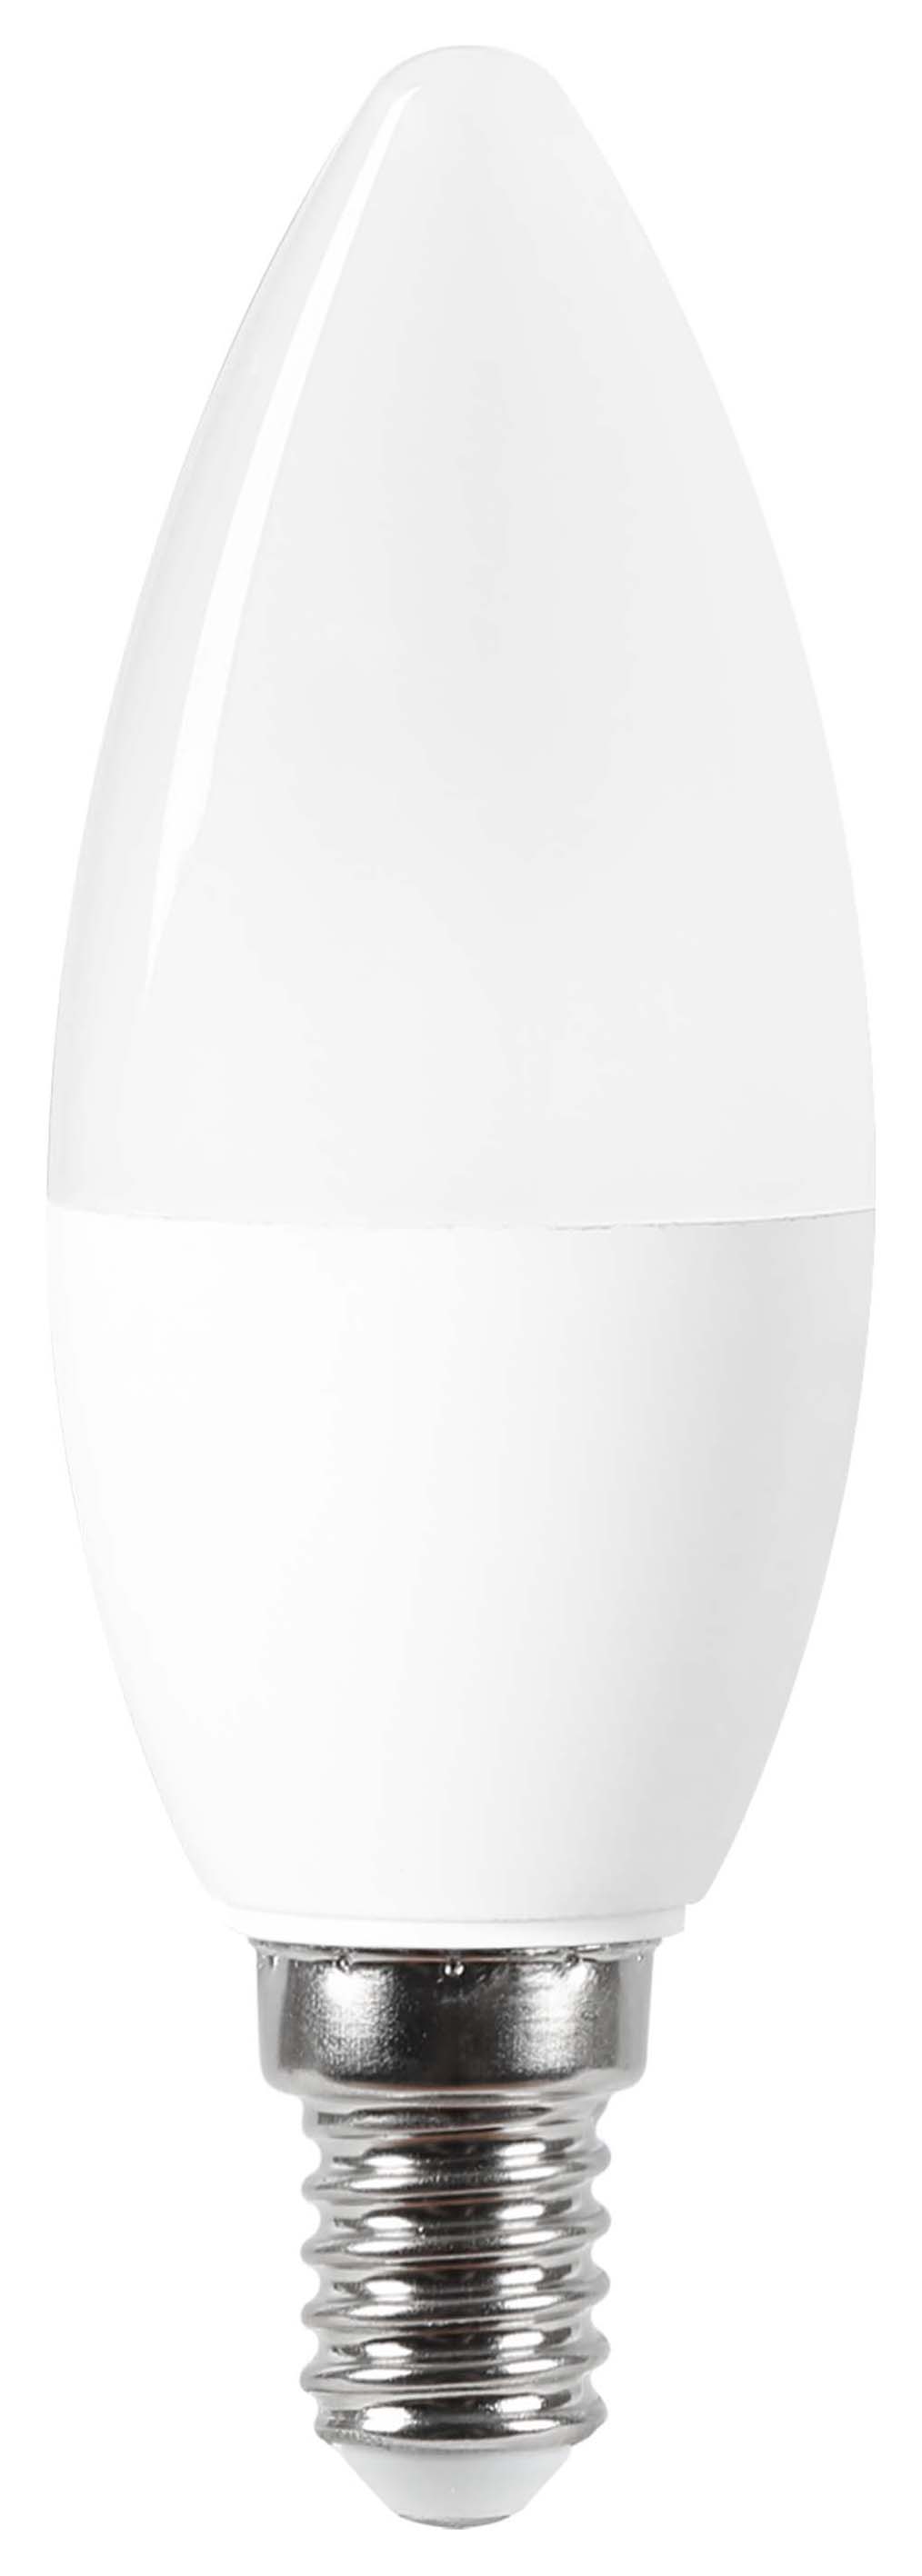 Image of Wickes Non-Dimmable Opal LED E14 Candle 7.2W Warm White Light Bulb